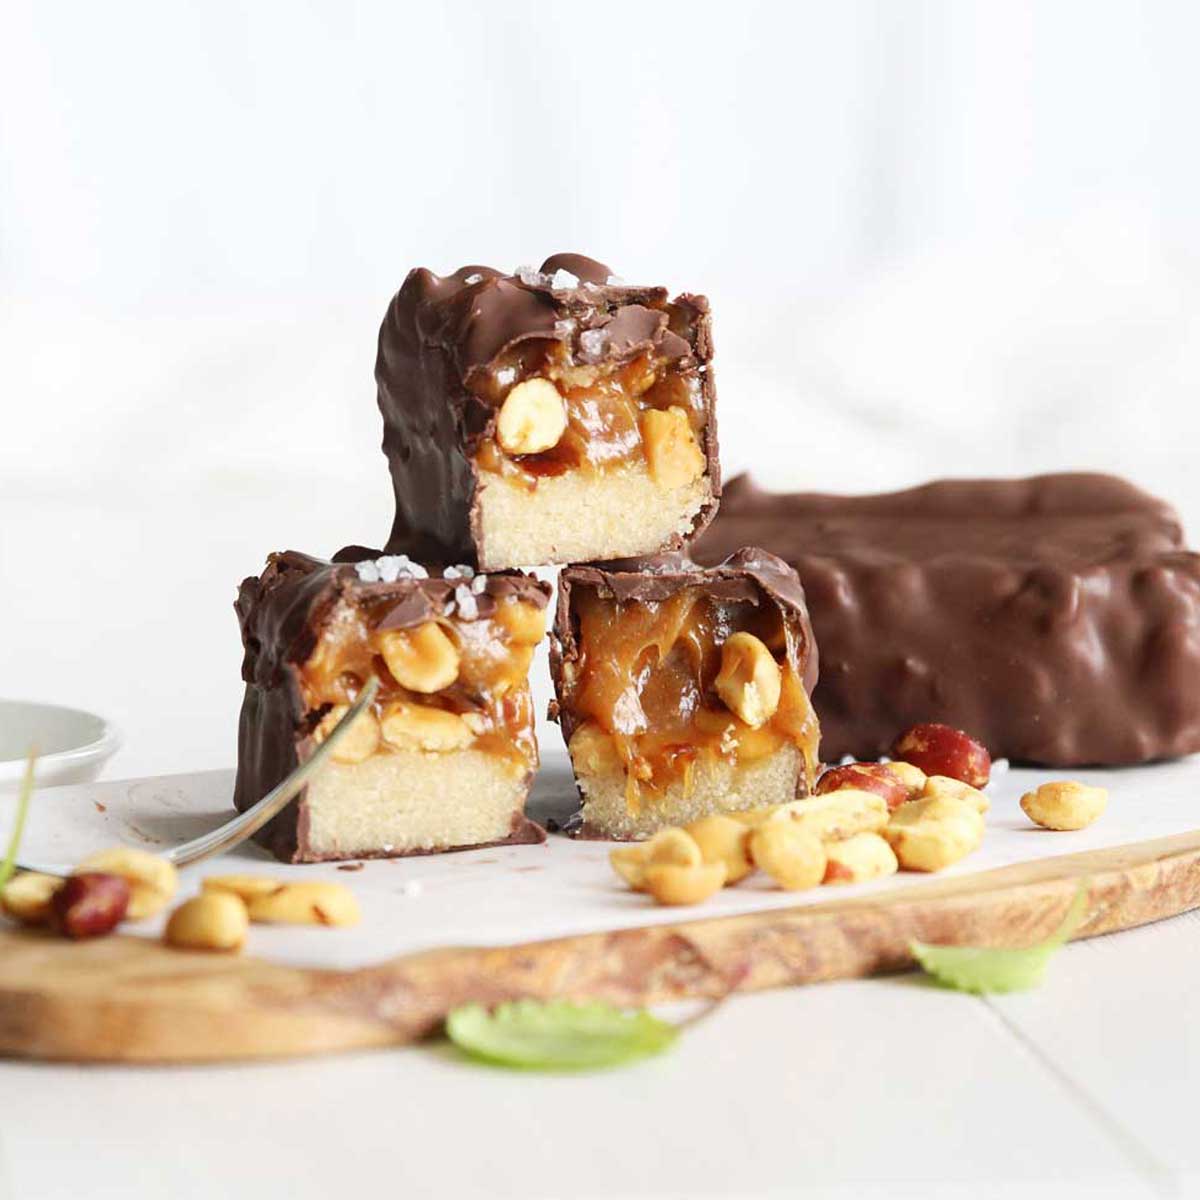 Guilt-Free Keto Snickers Protein Bars made with Collagen Peptides Powder - Peanut Butter Glaze